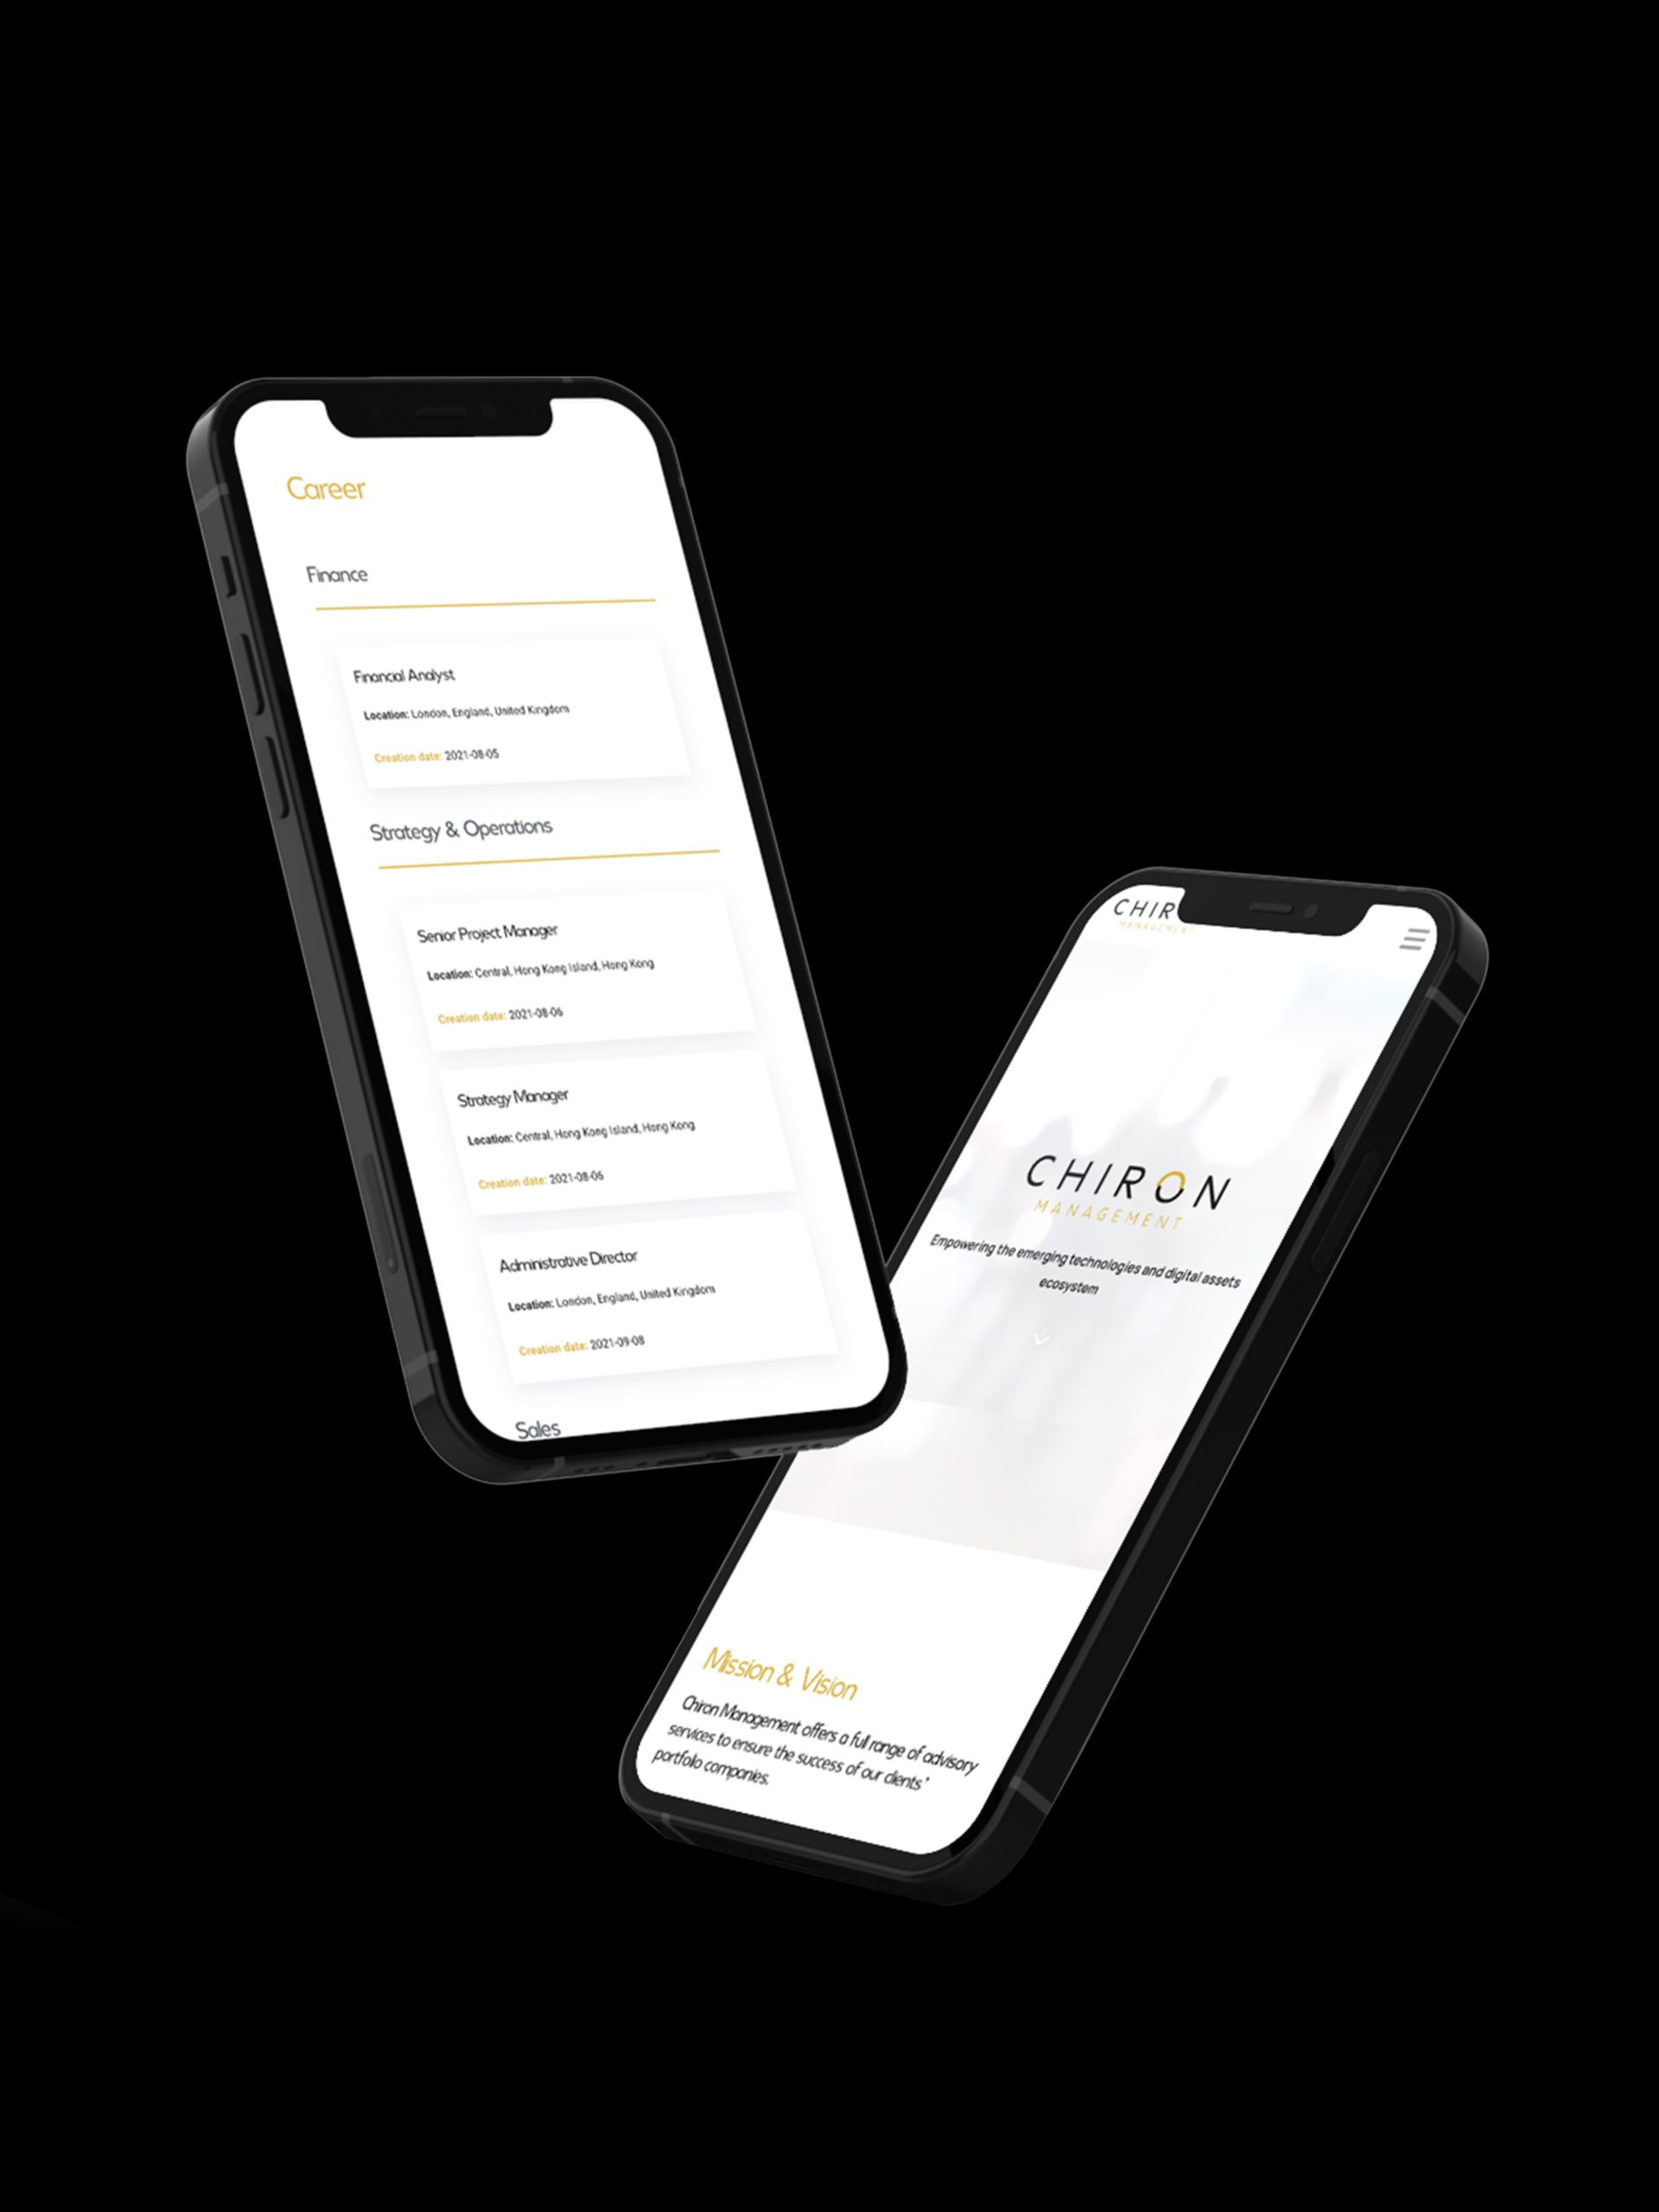 Chiron Management website shown on phones with black background